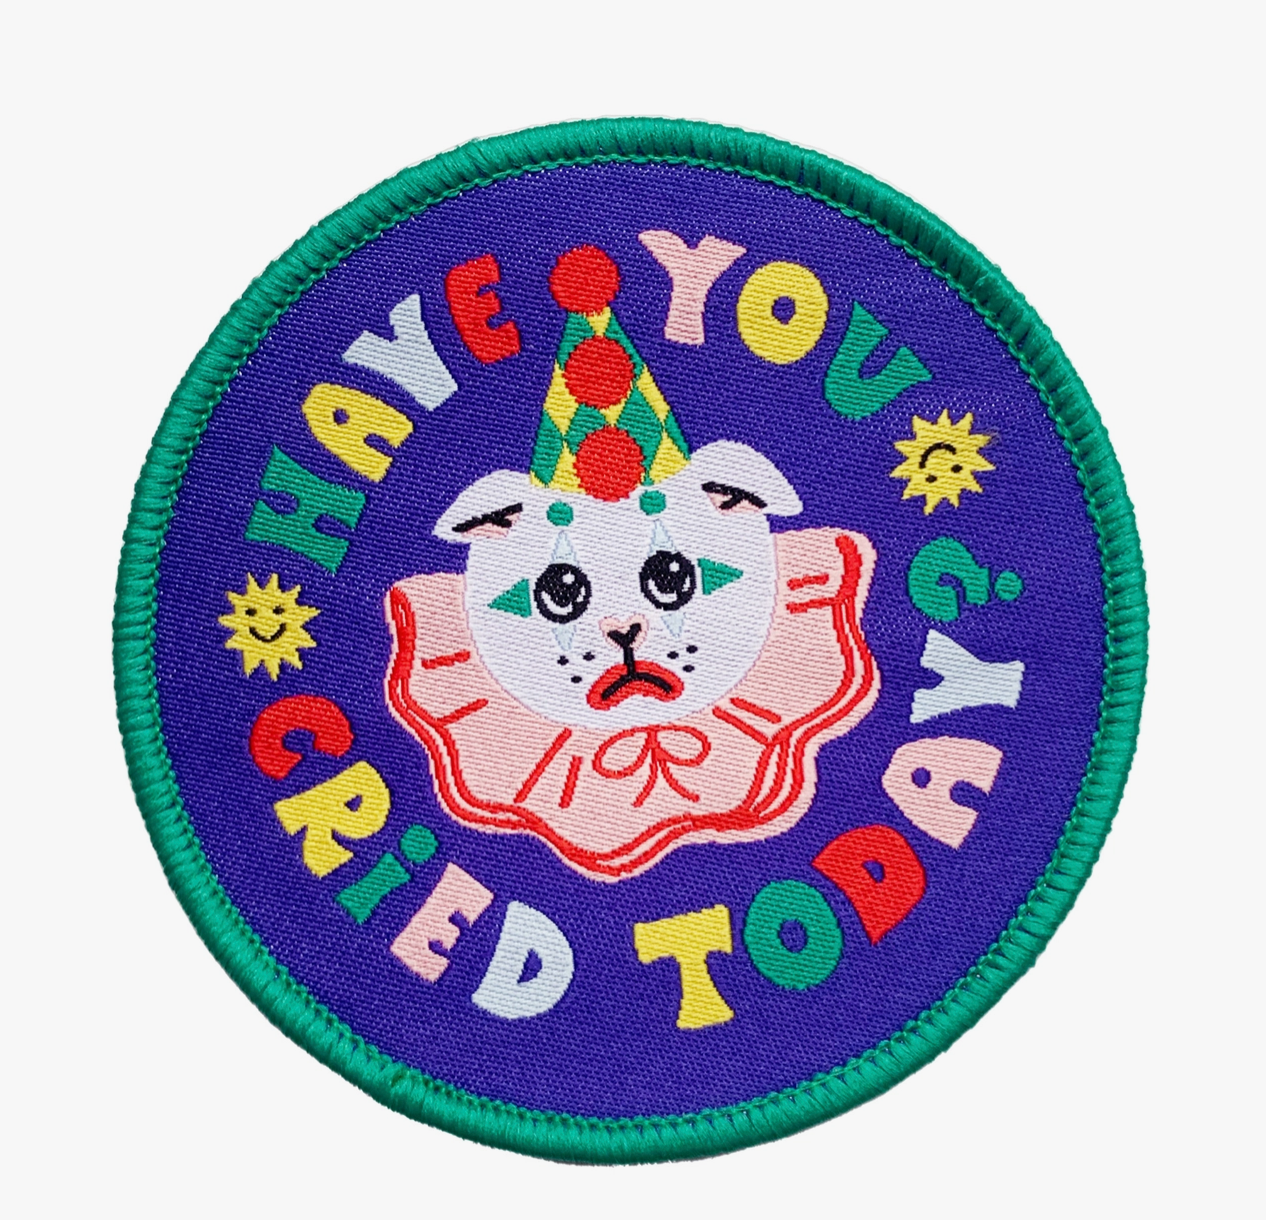 5 EYE STUDIO Have You Cried Today? Iron-on Patch